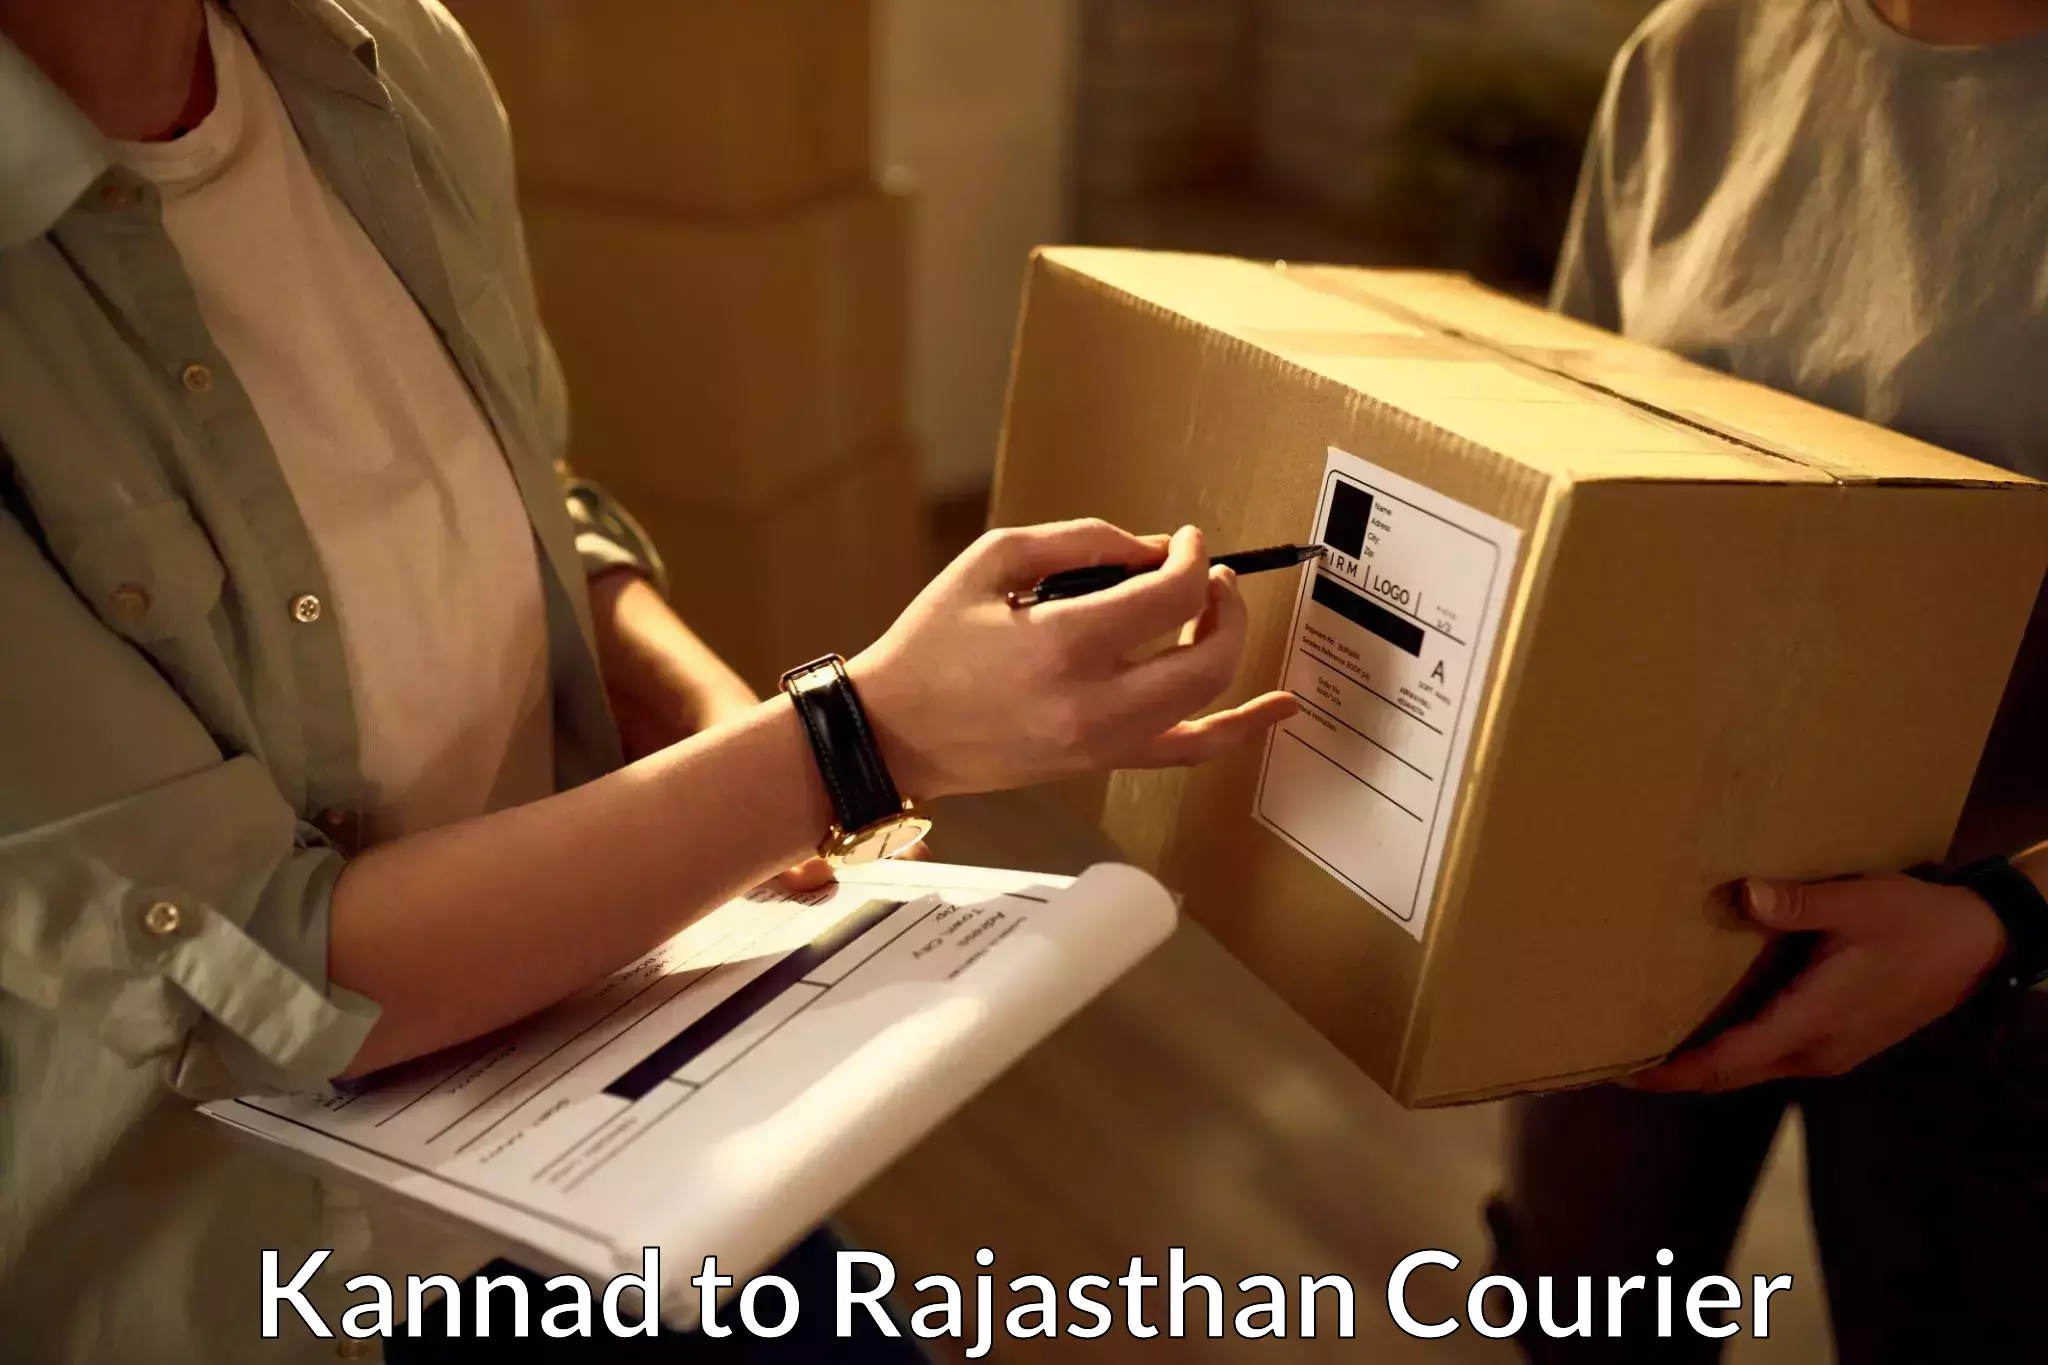 Courier service comparison Kannad to Chomu